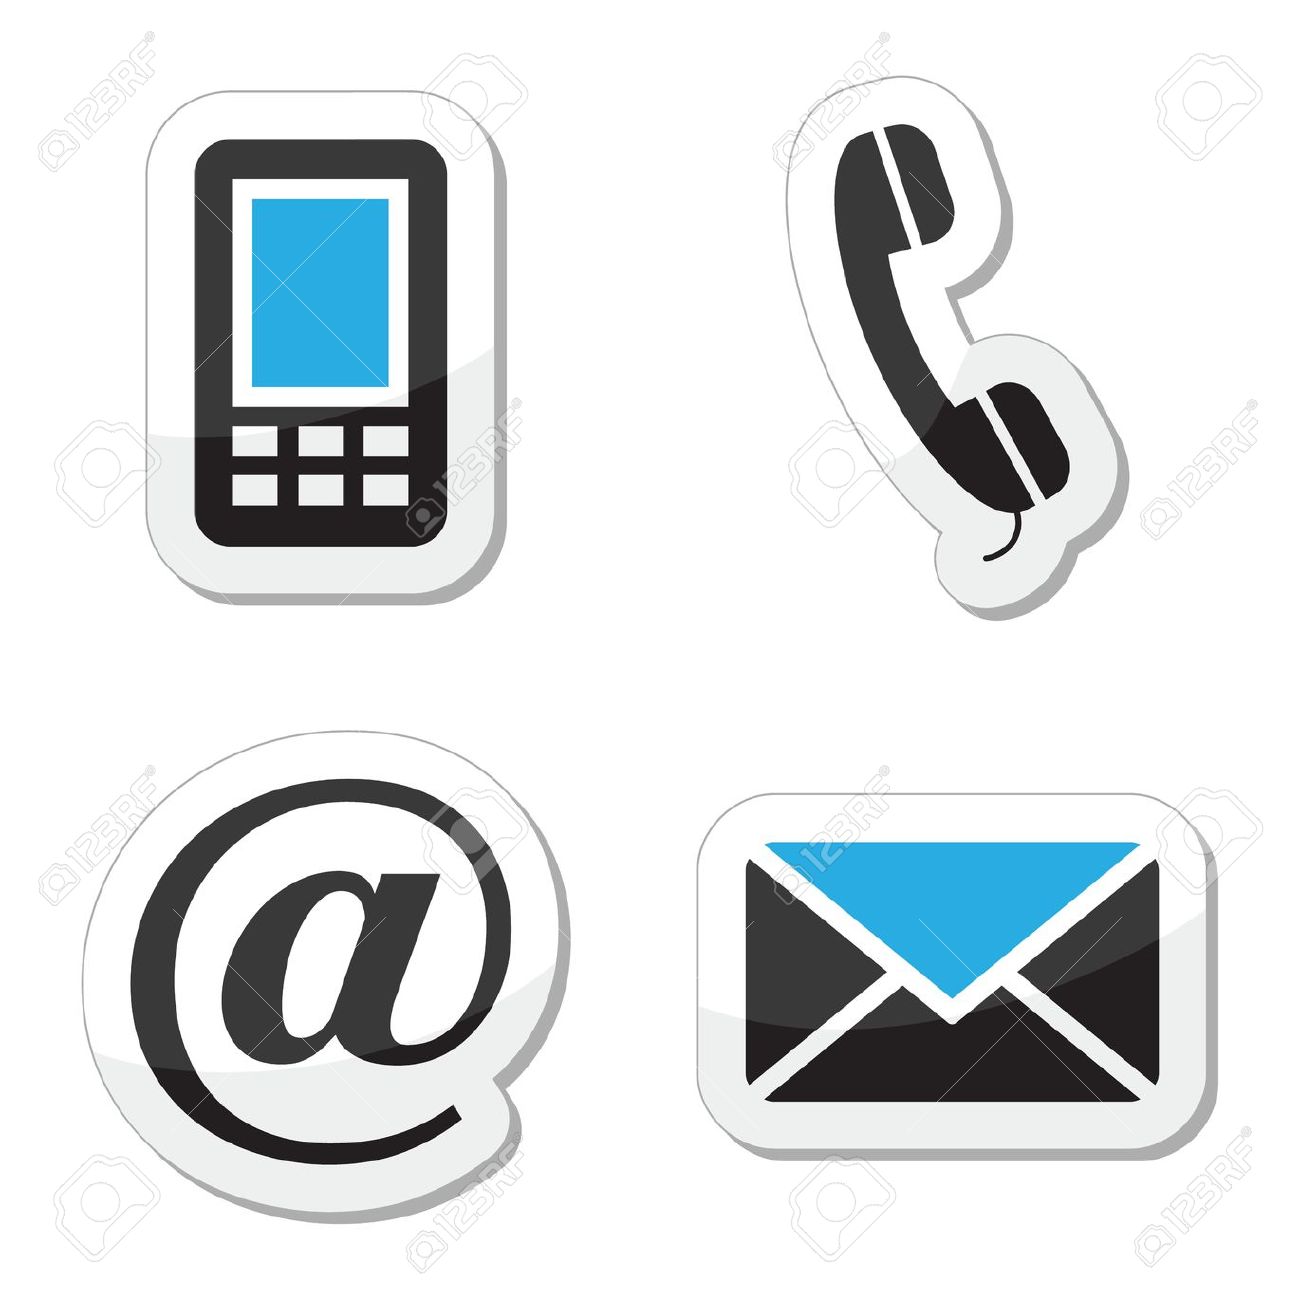 phone email clipart - photo #28